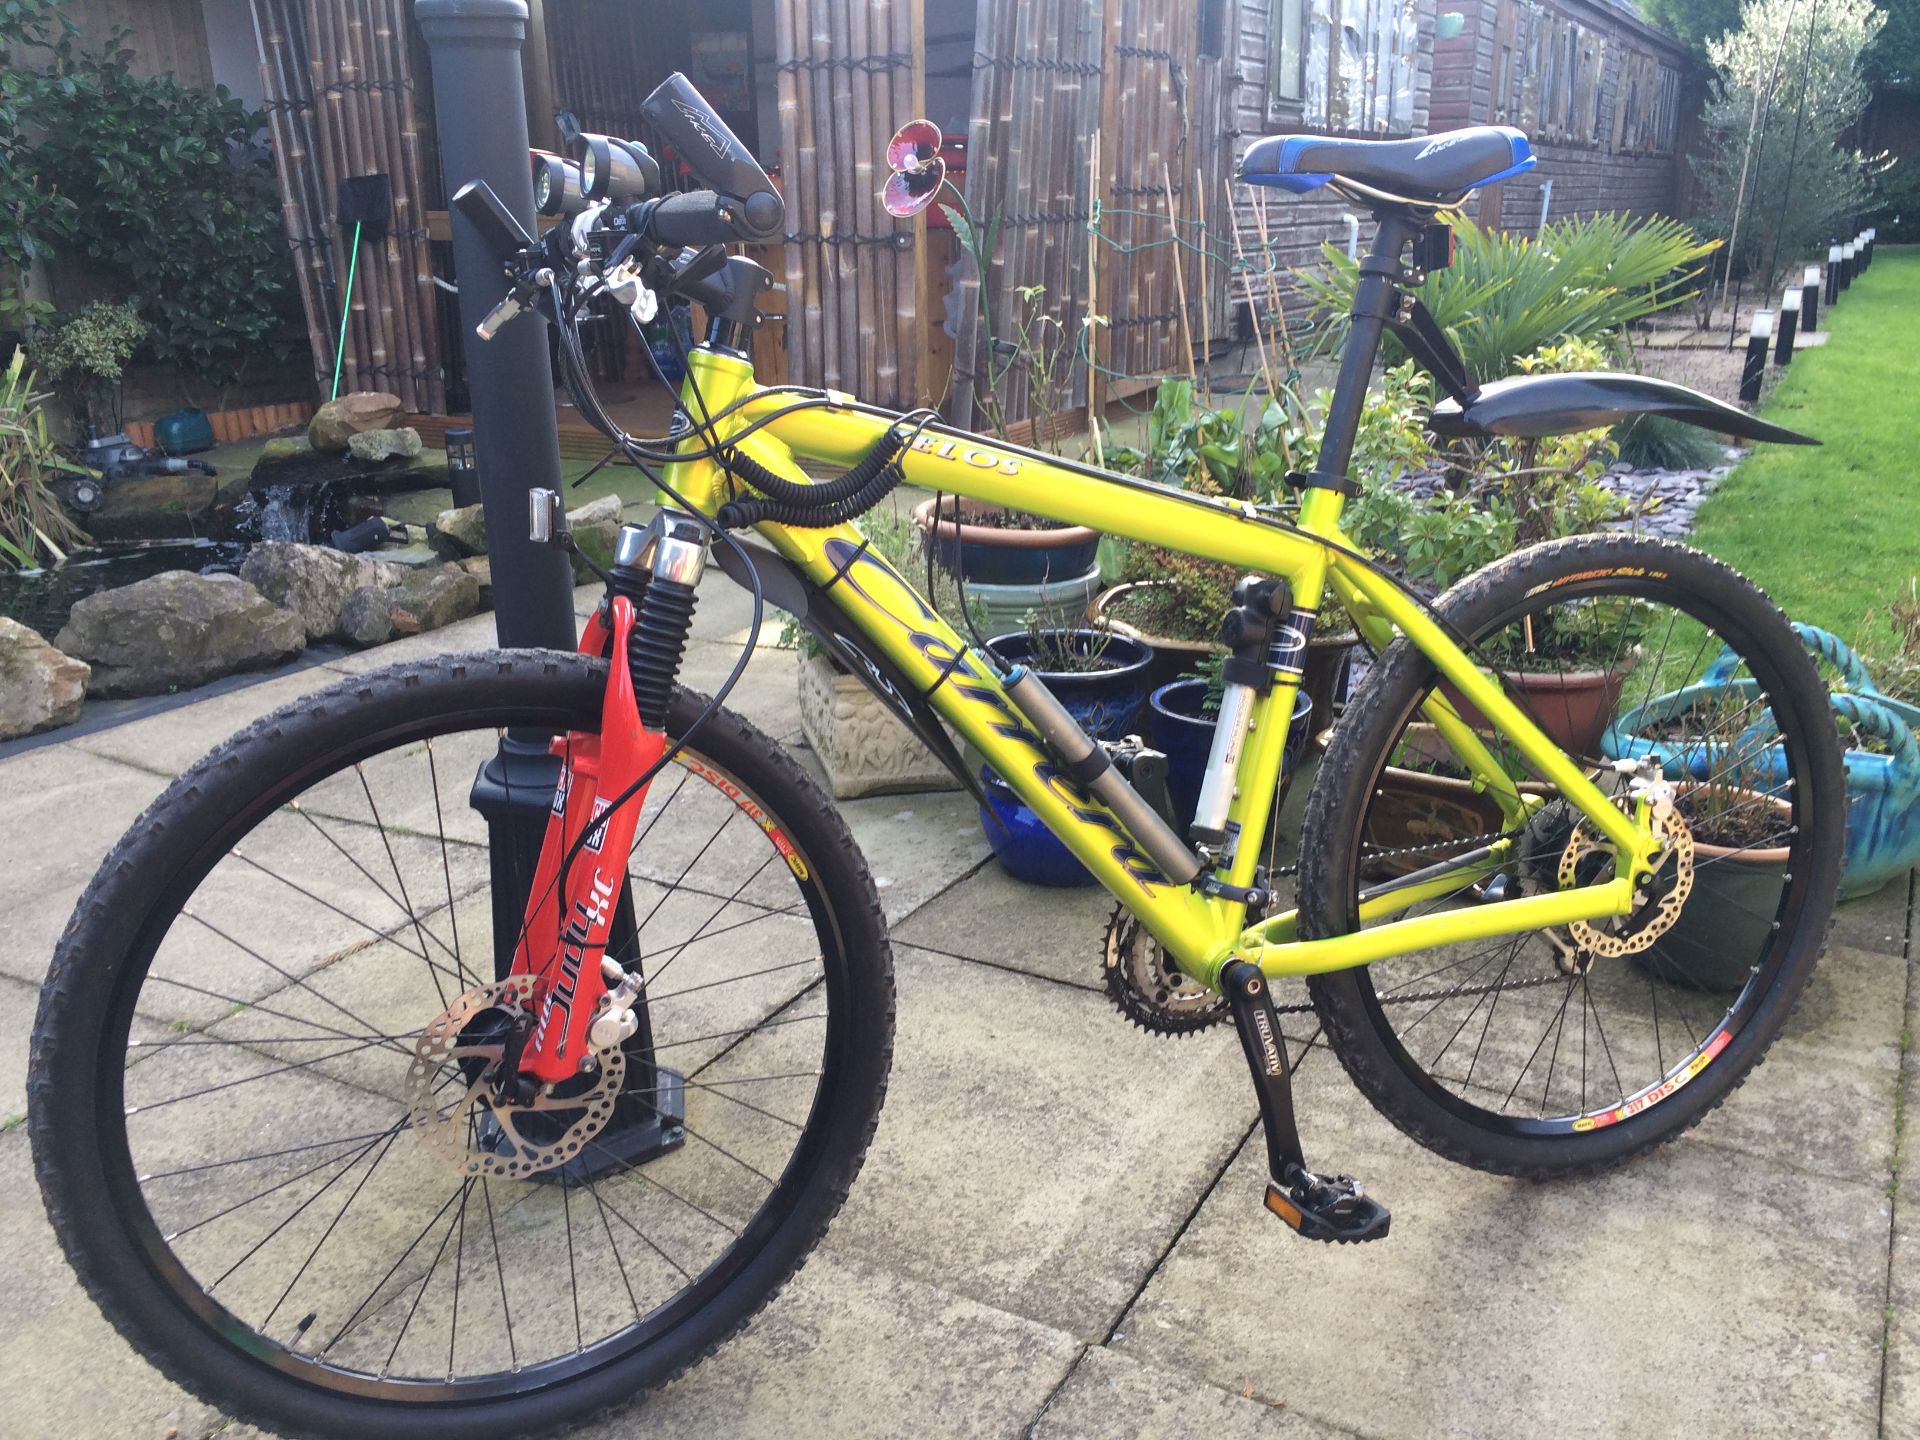 Carrera fully loaded mountain bike costing new £870.00 plus extras. This bike is in fully working